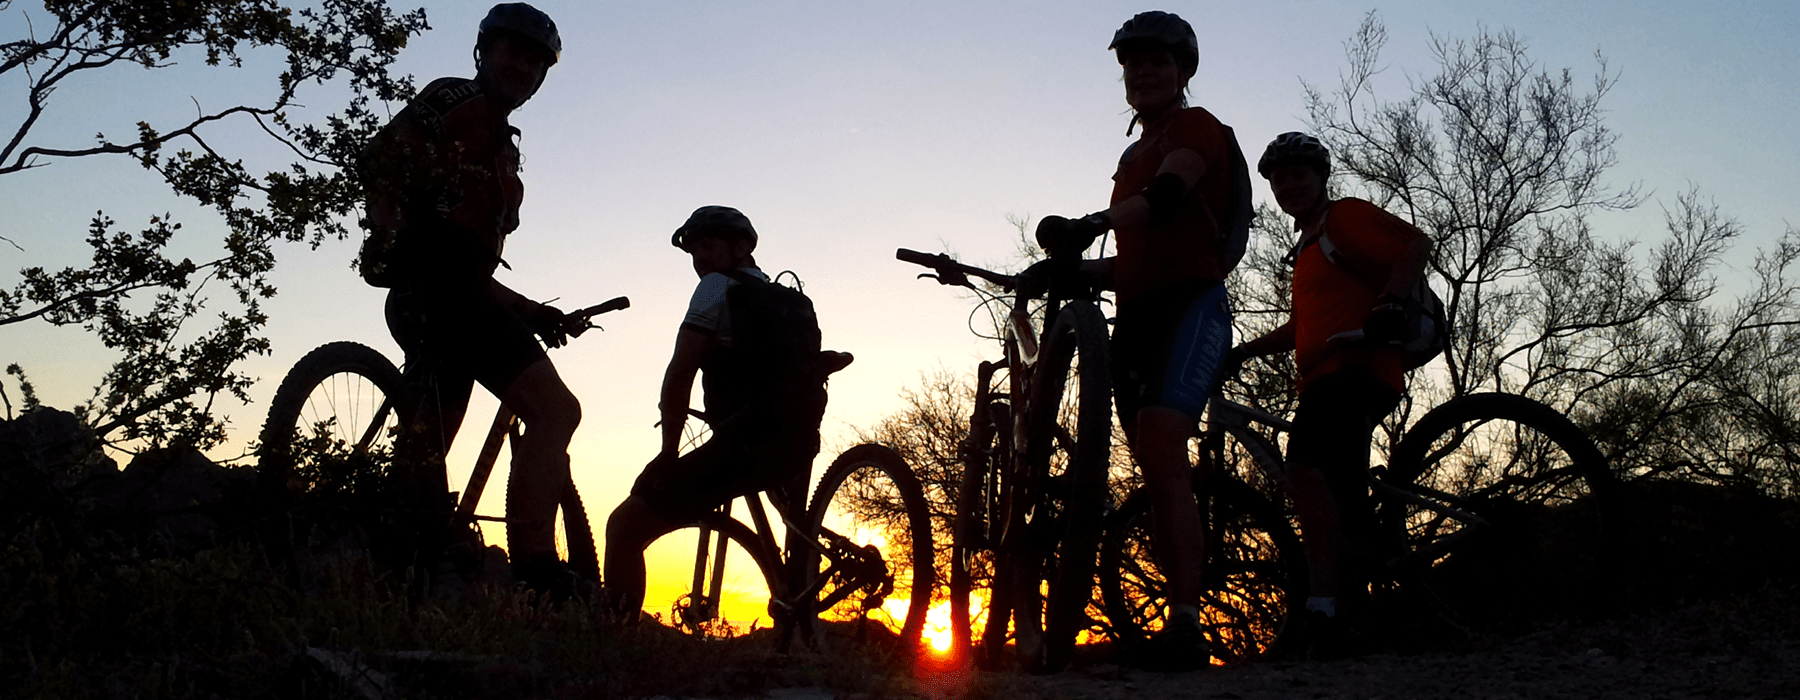 lifestyle image of a group on their bicycles at dusk